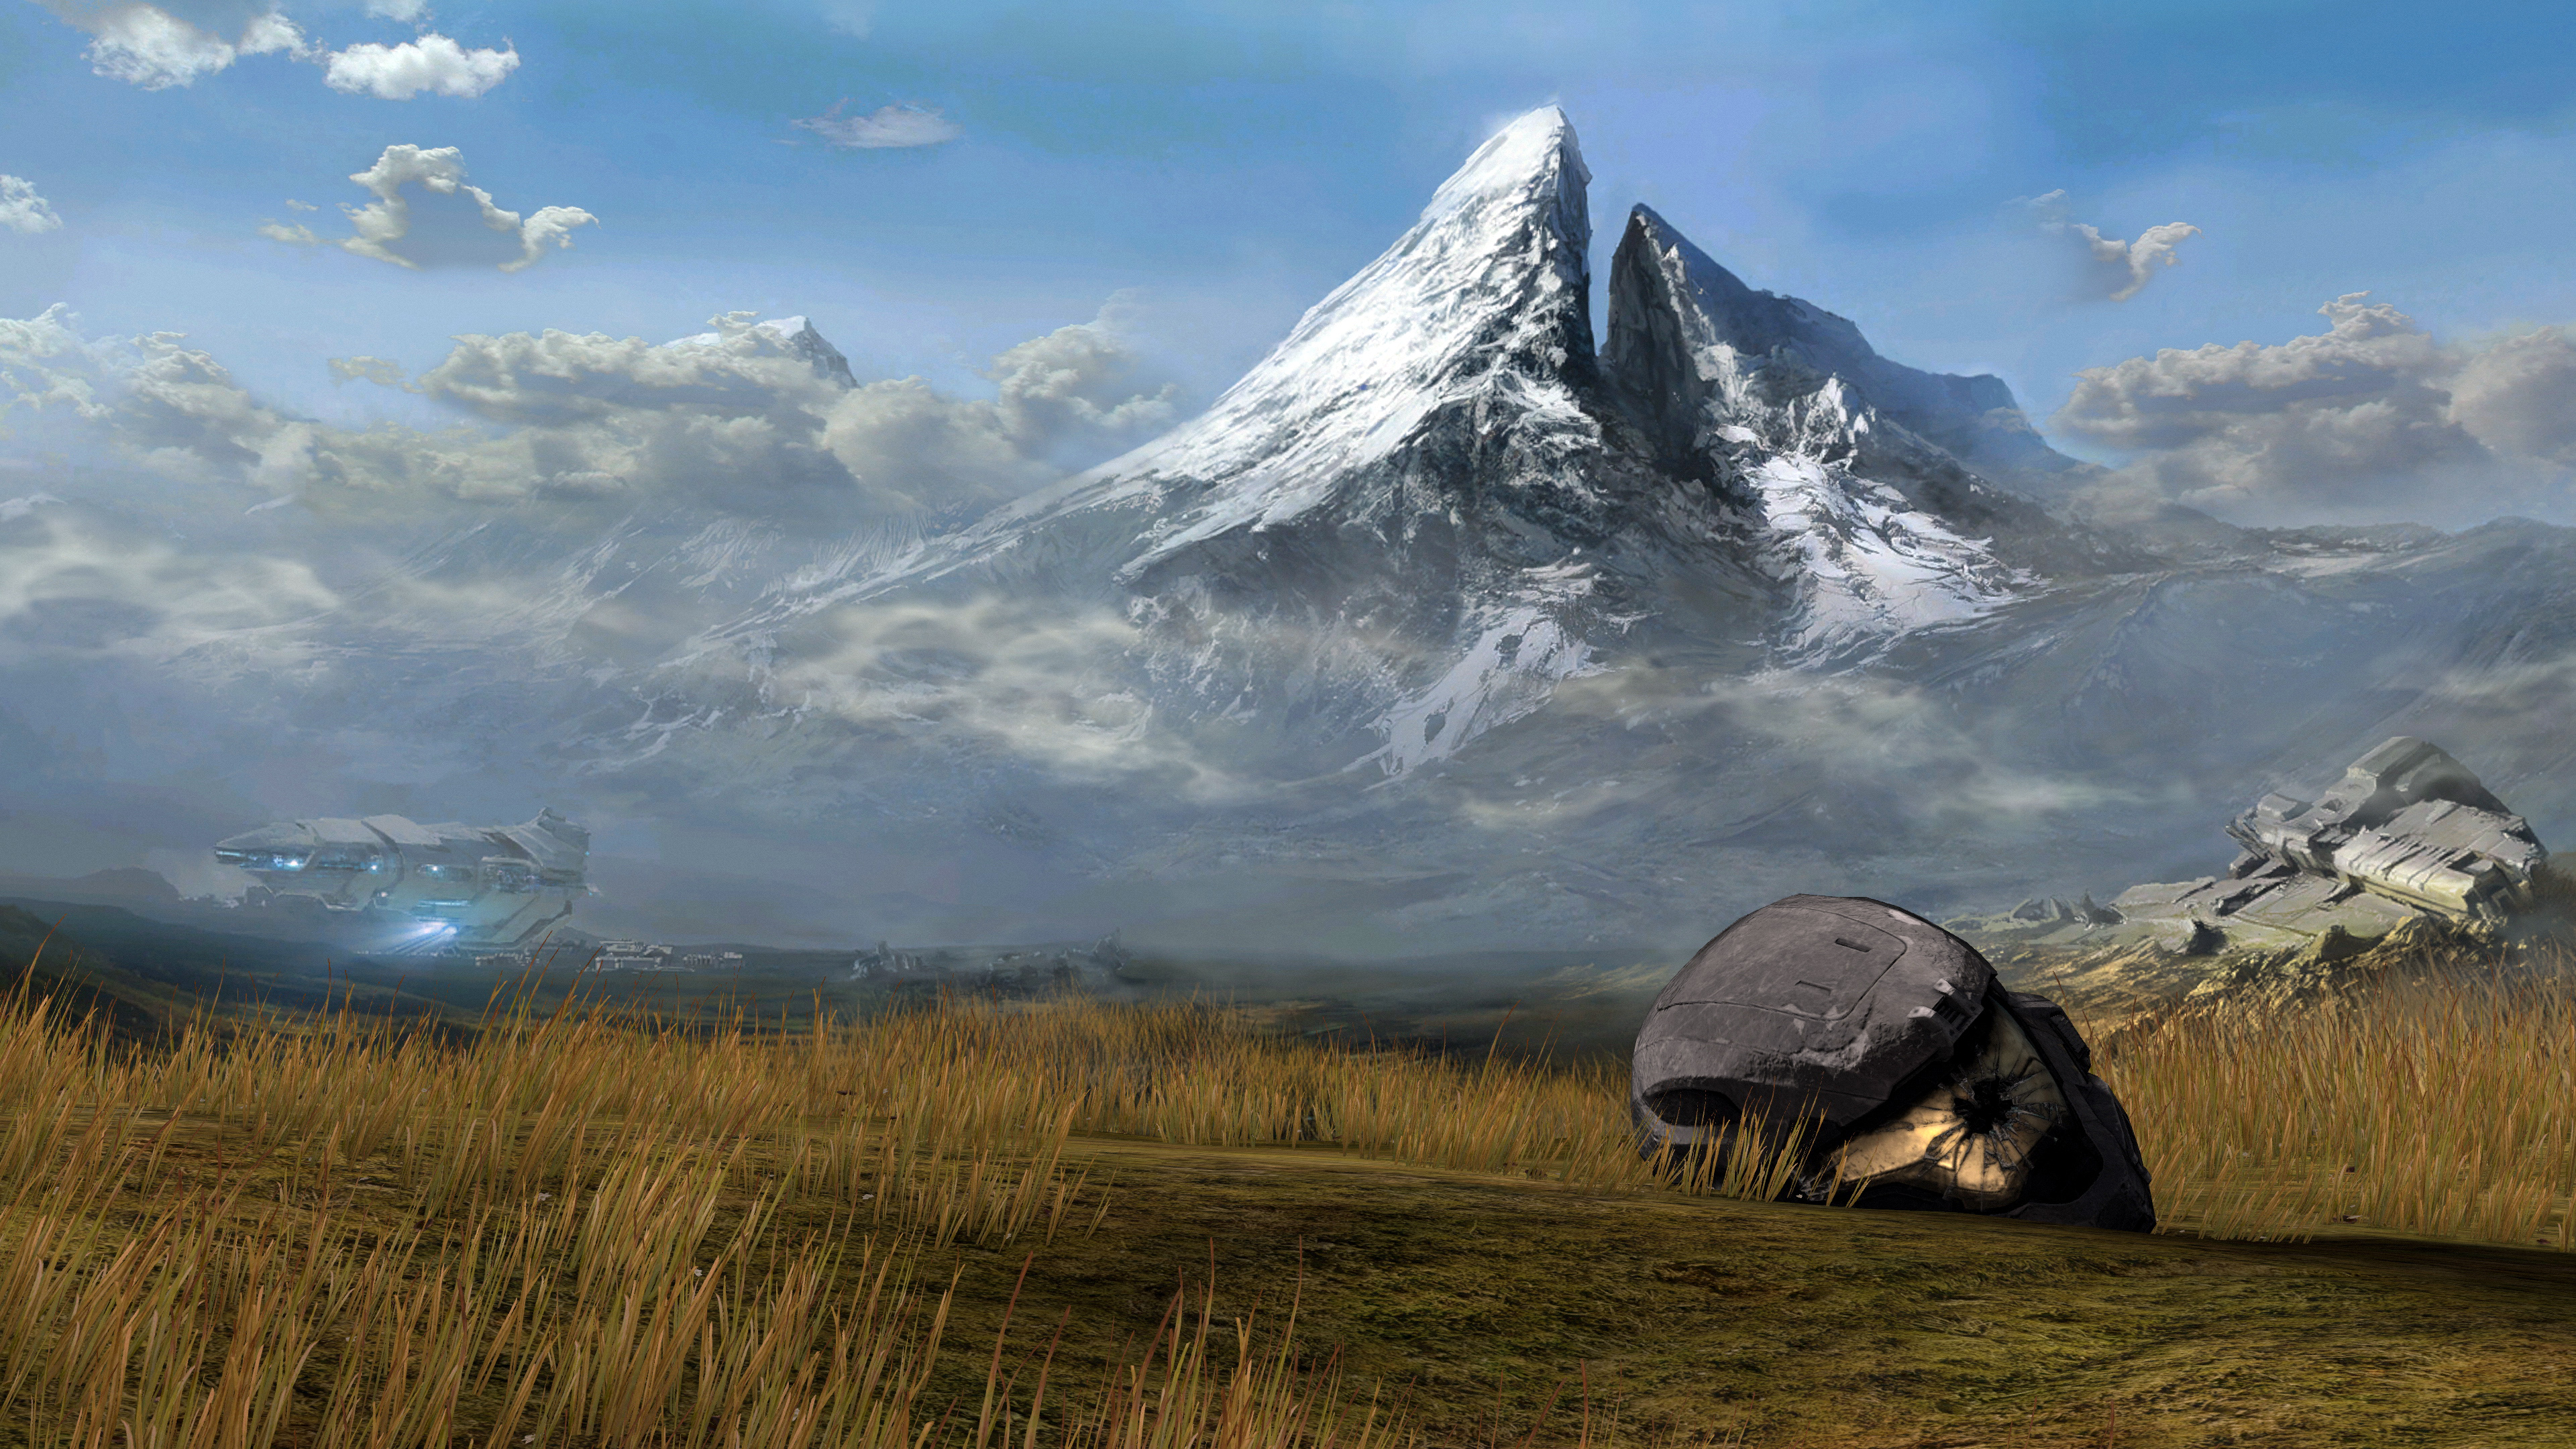 Halo Reach Halo Video Games Video Game Art Mountains 3840x2160